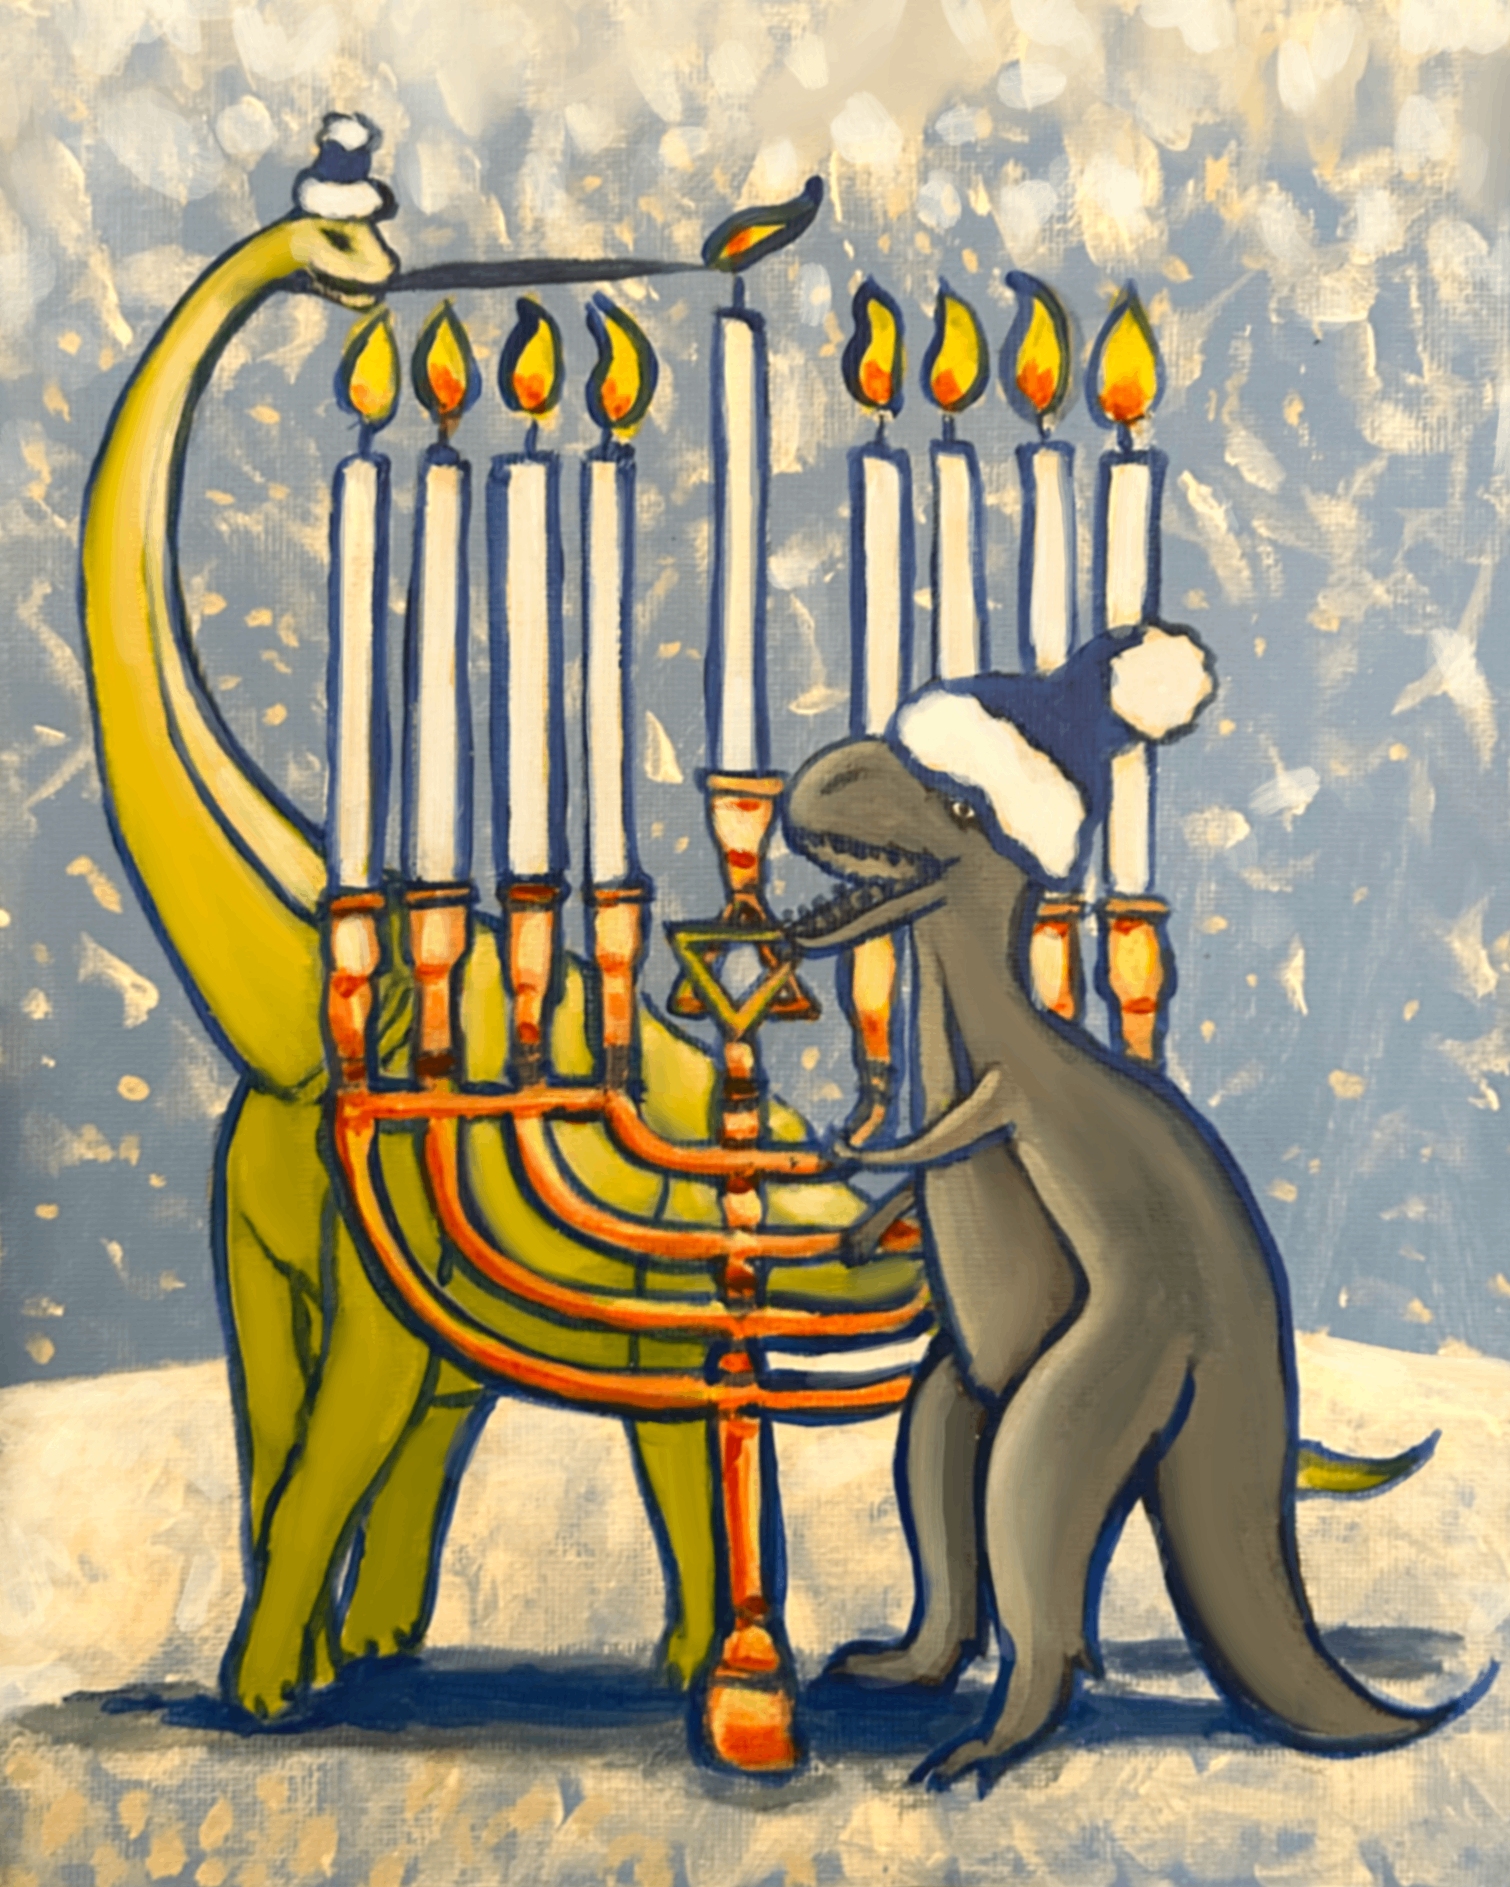 Dinosaur Hanukkah Painting on canvas - two dinosaurs (brontosaurus and t-rex) dressed with blue winter hats lighting a giant menorah